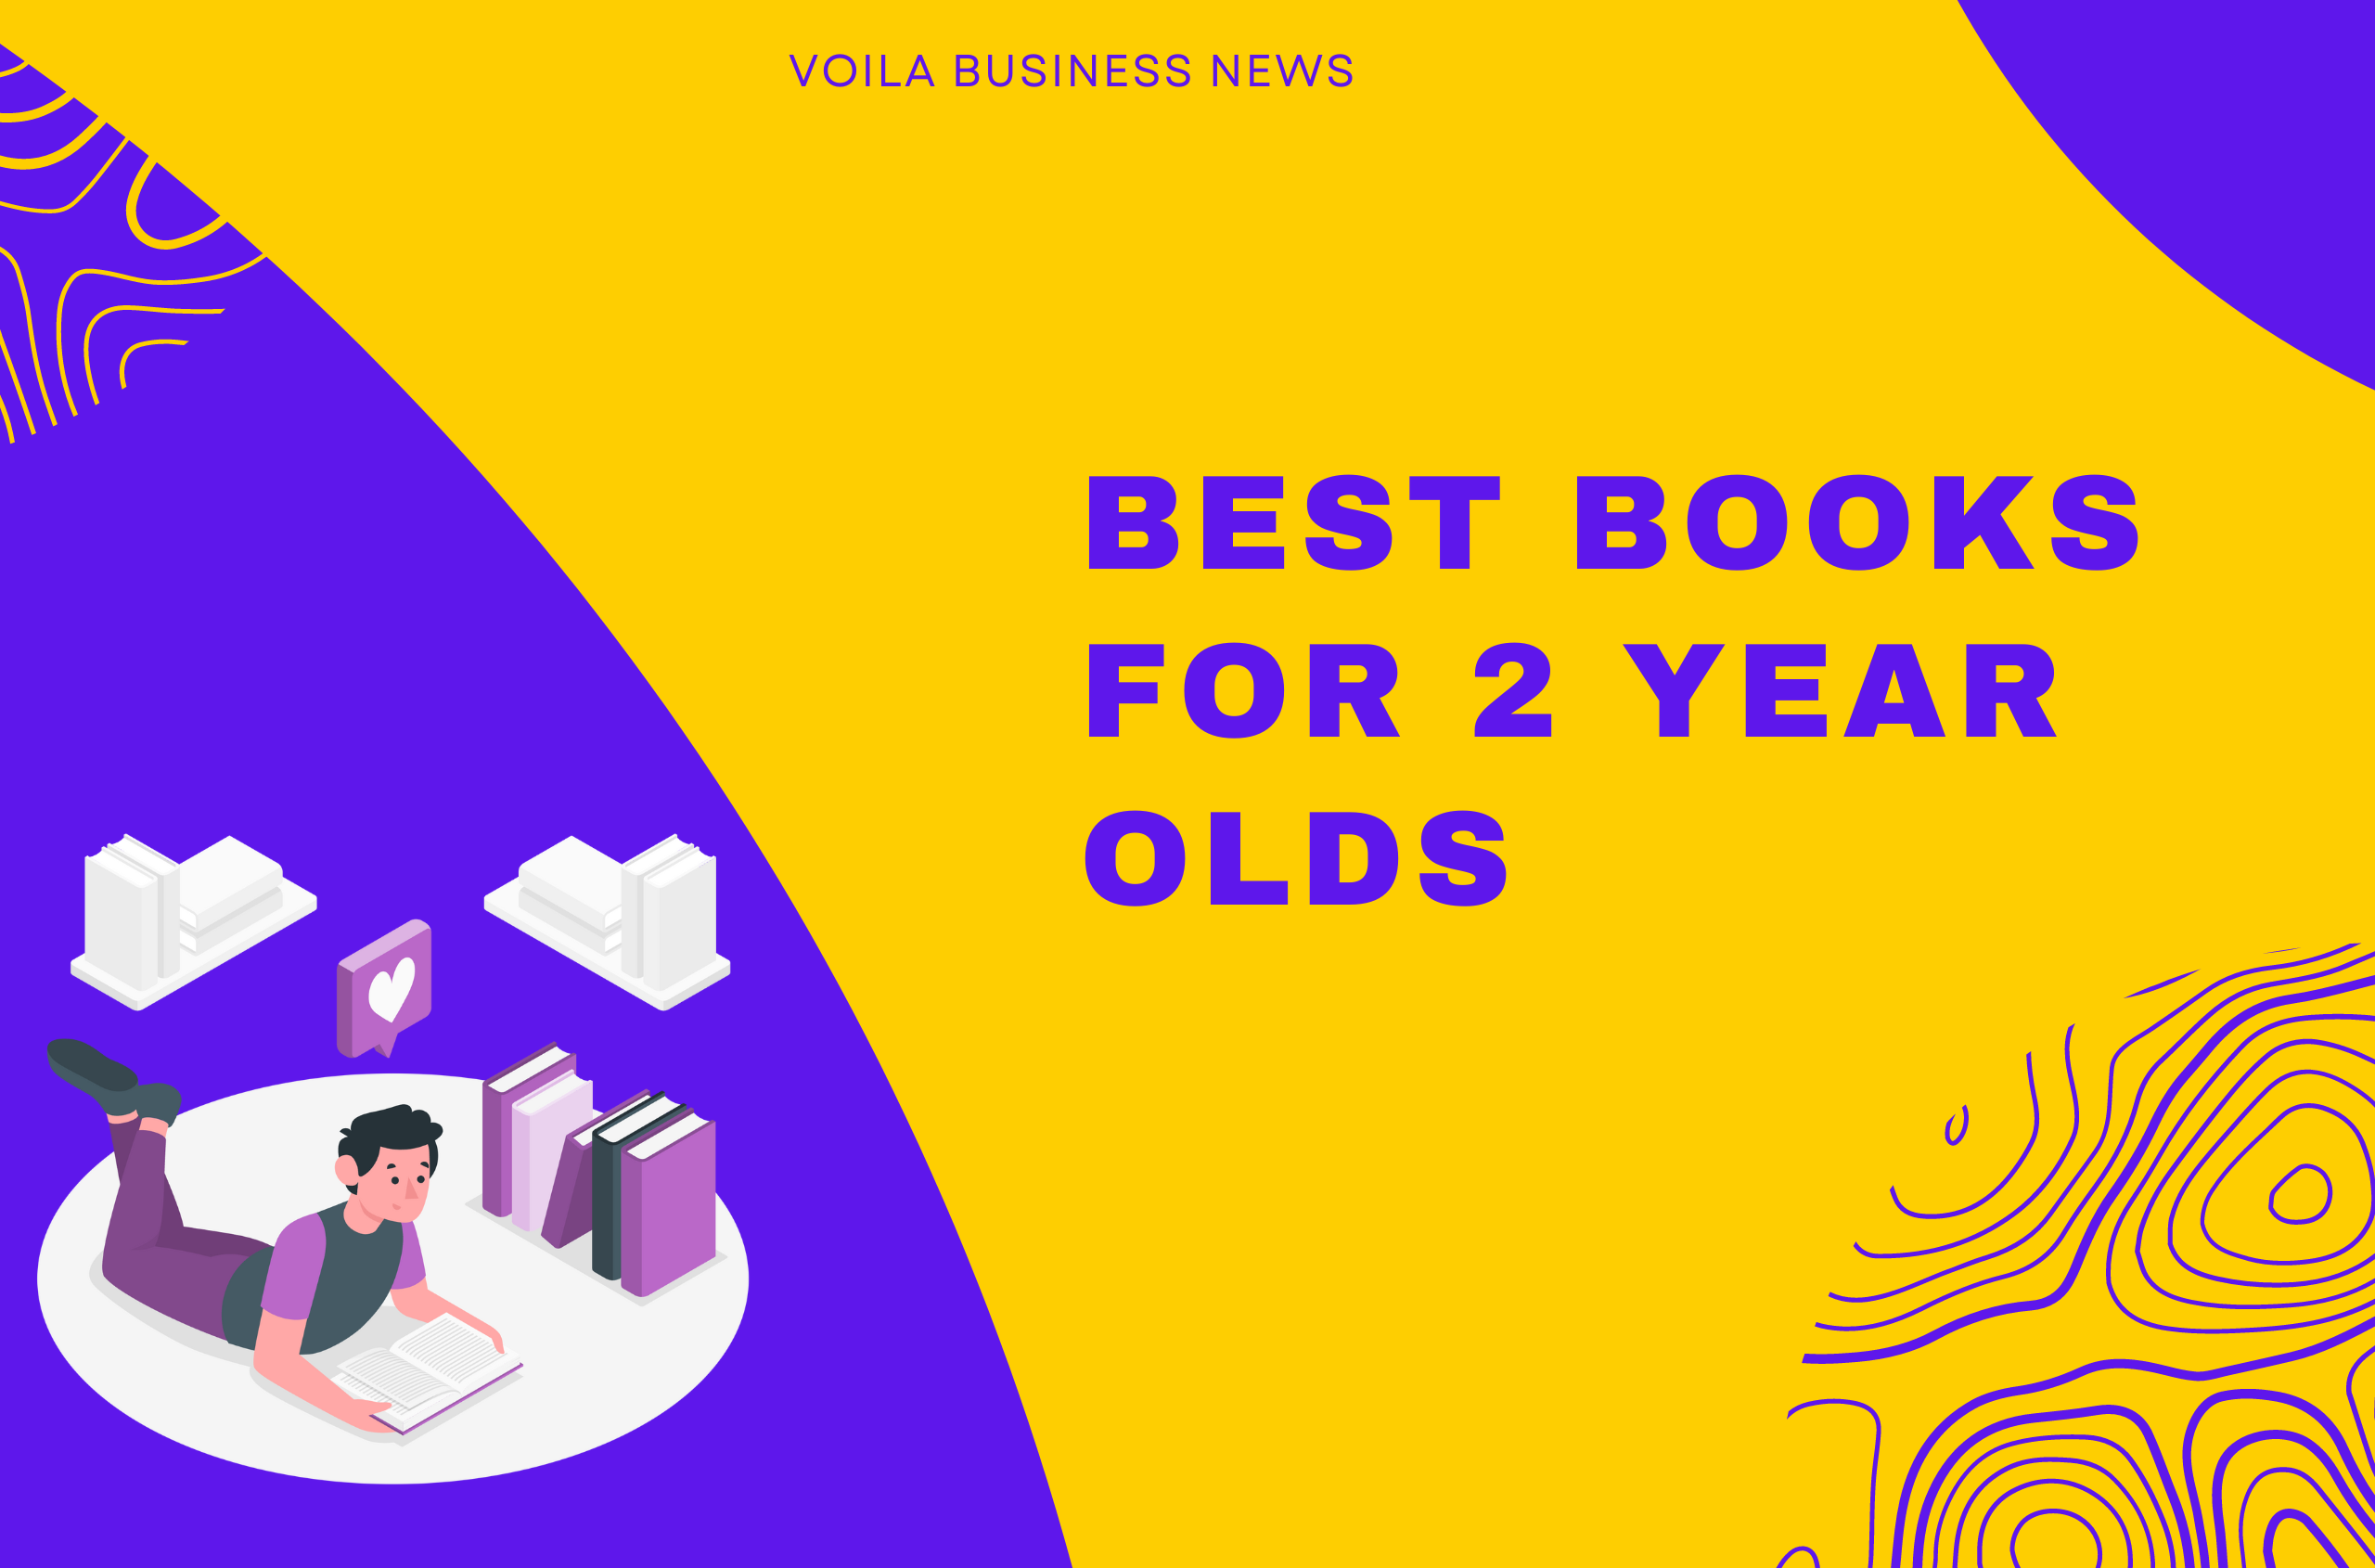 20 Best Books for 2 Year Olds: Fun and Educational Books for Toddlers